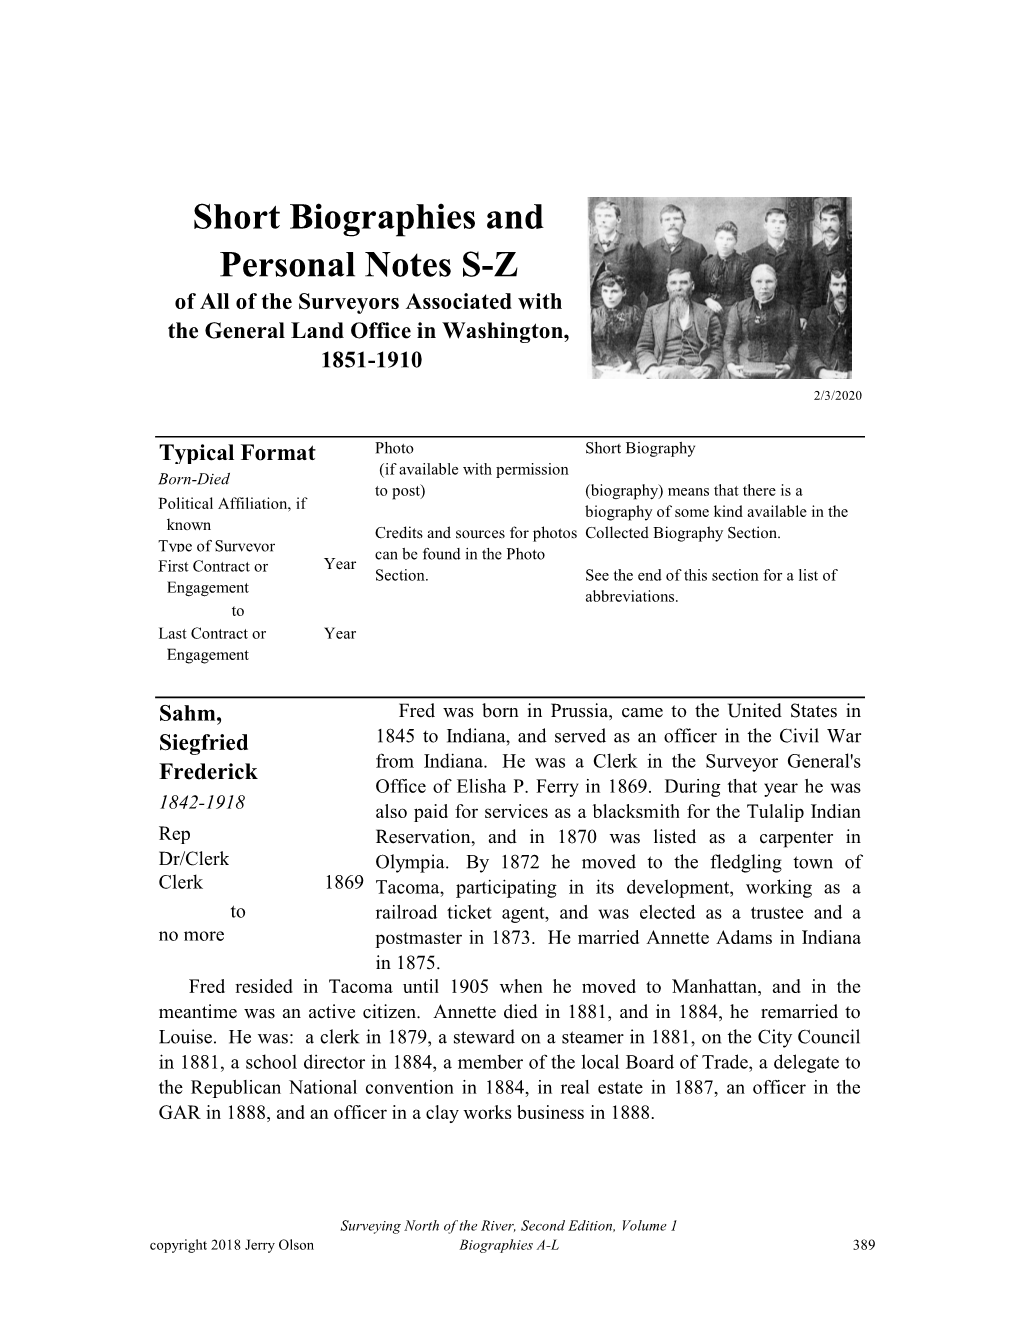 Short Biographies and Personal Notes S-Z of All of the Surveyors Associated with the General Land Office in Washington, 1851-1910